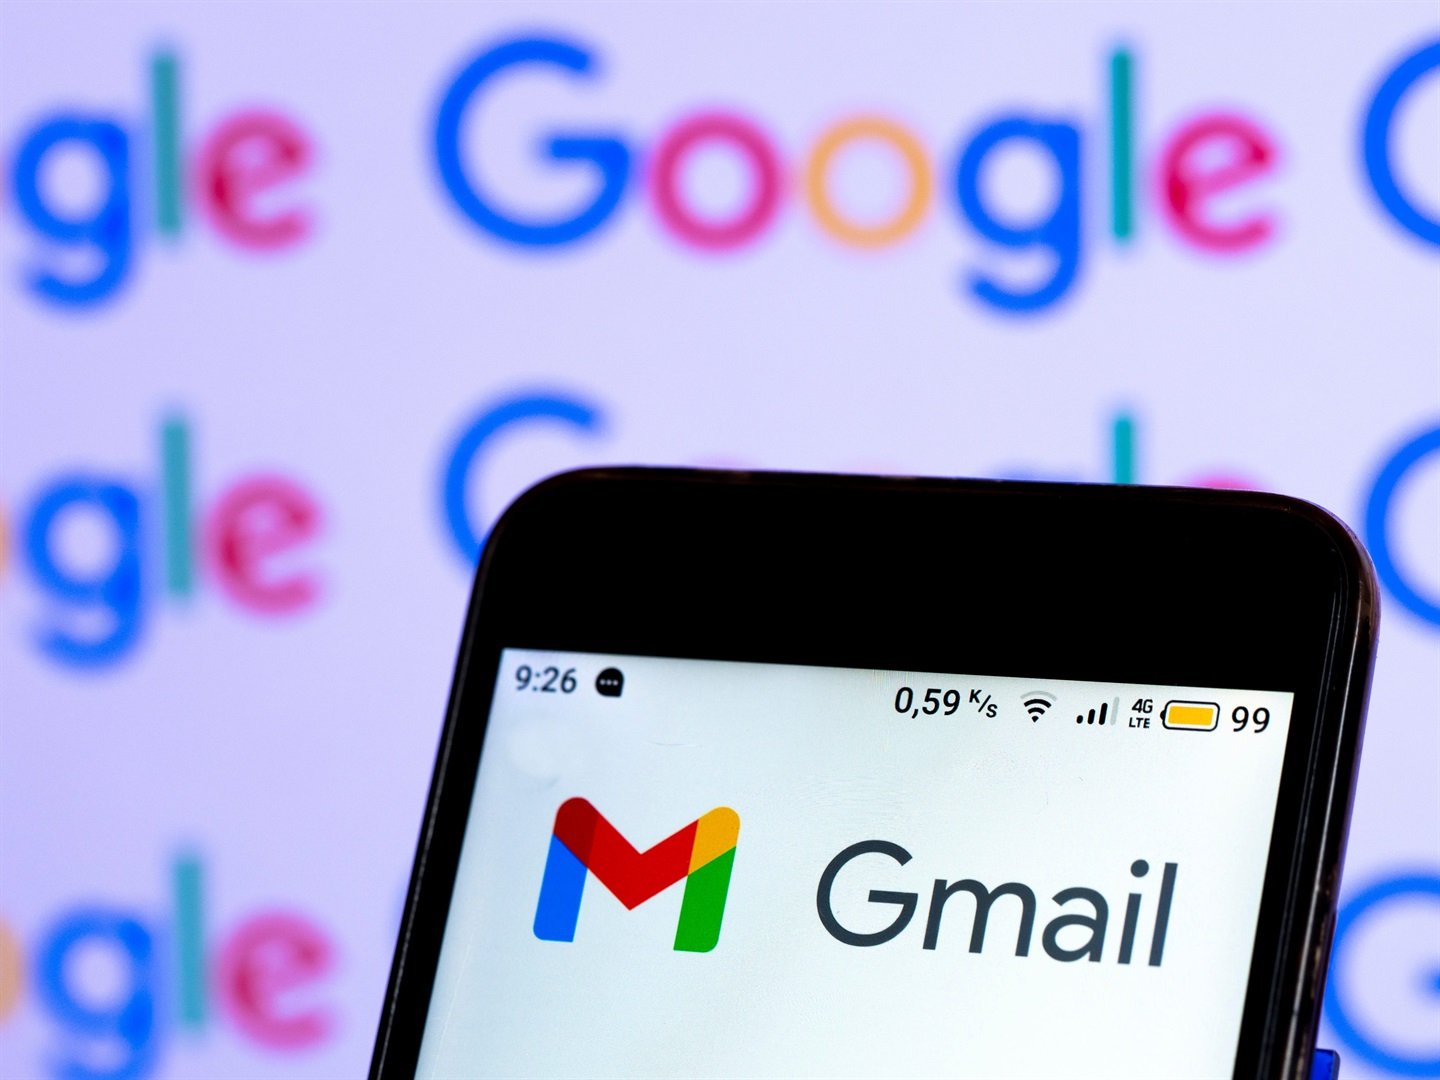 Businessinsider.co.za | Google will bring generative AI to Gmail. It's trying to stem the threat of the Microsoft-OpenAI alliance.